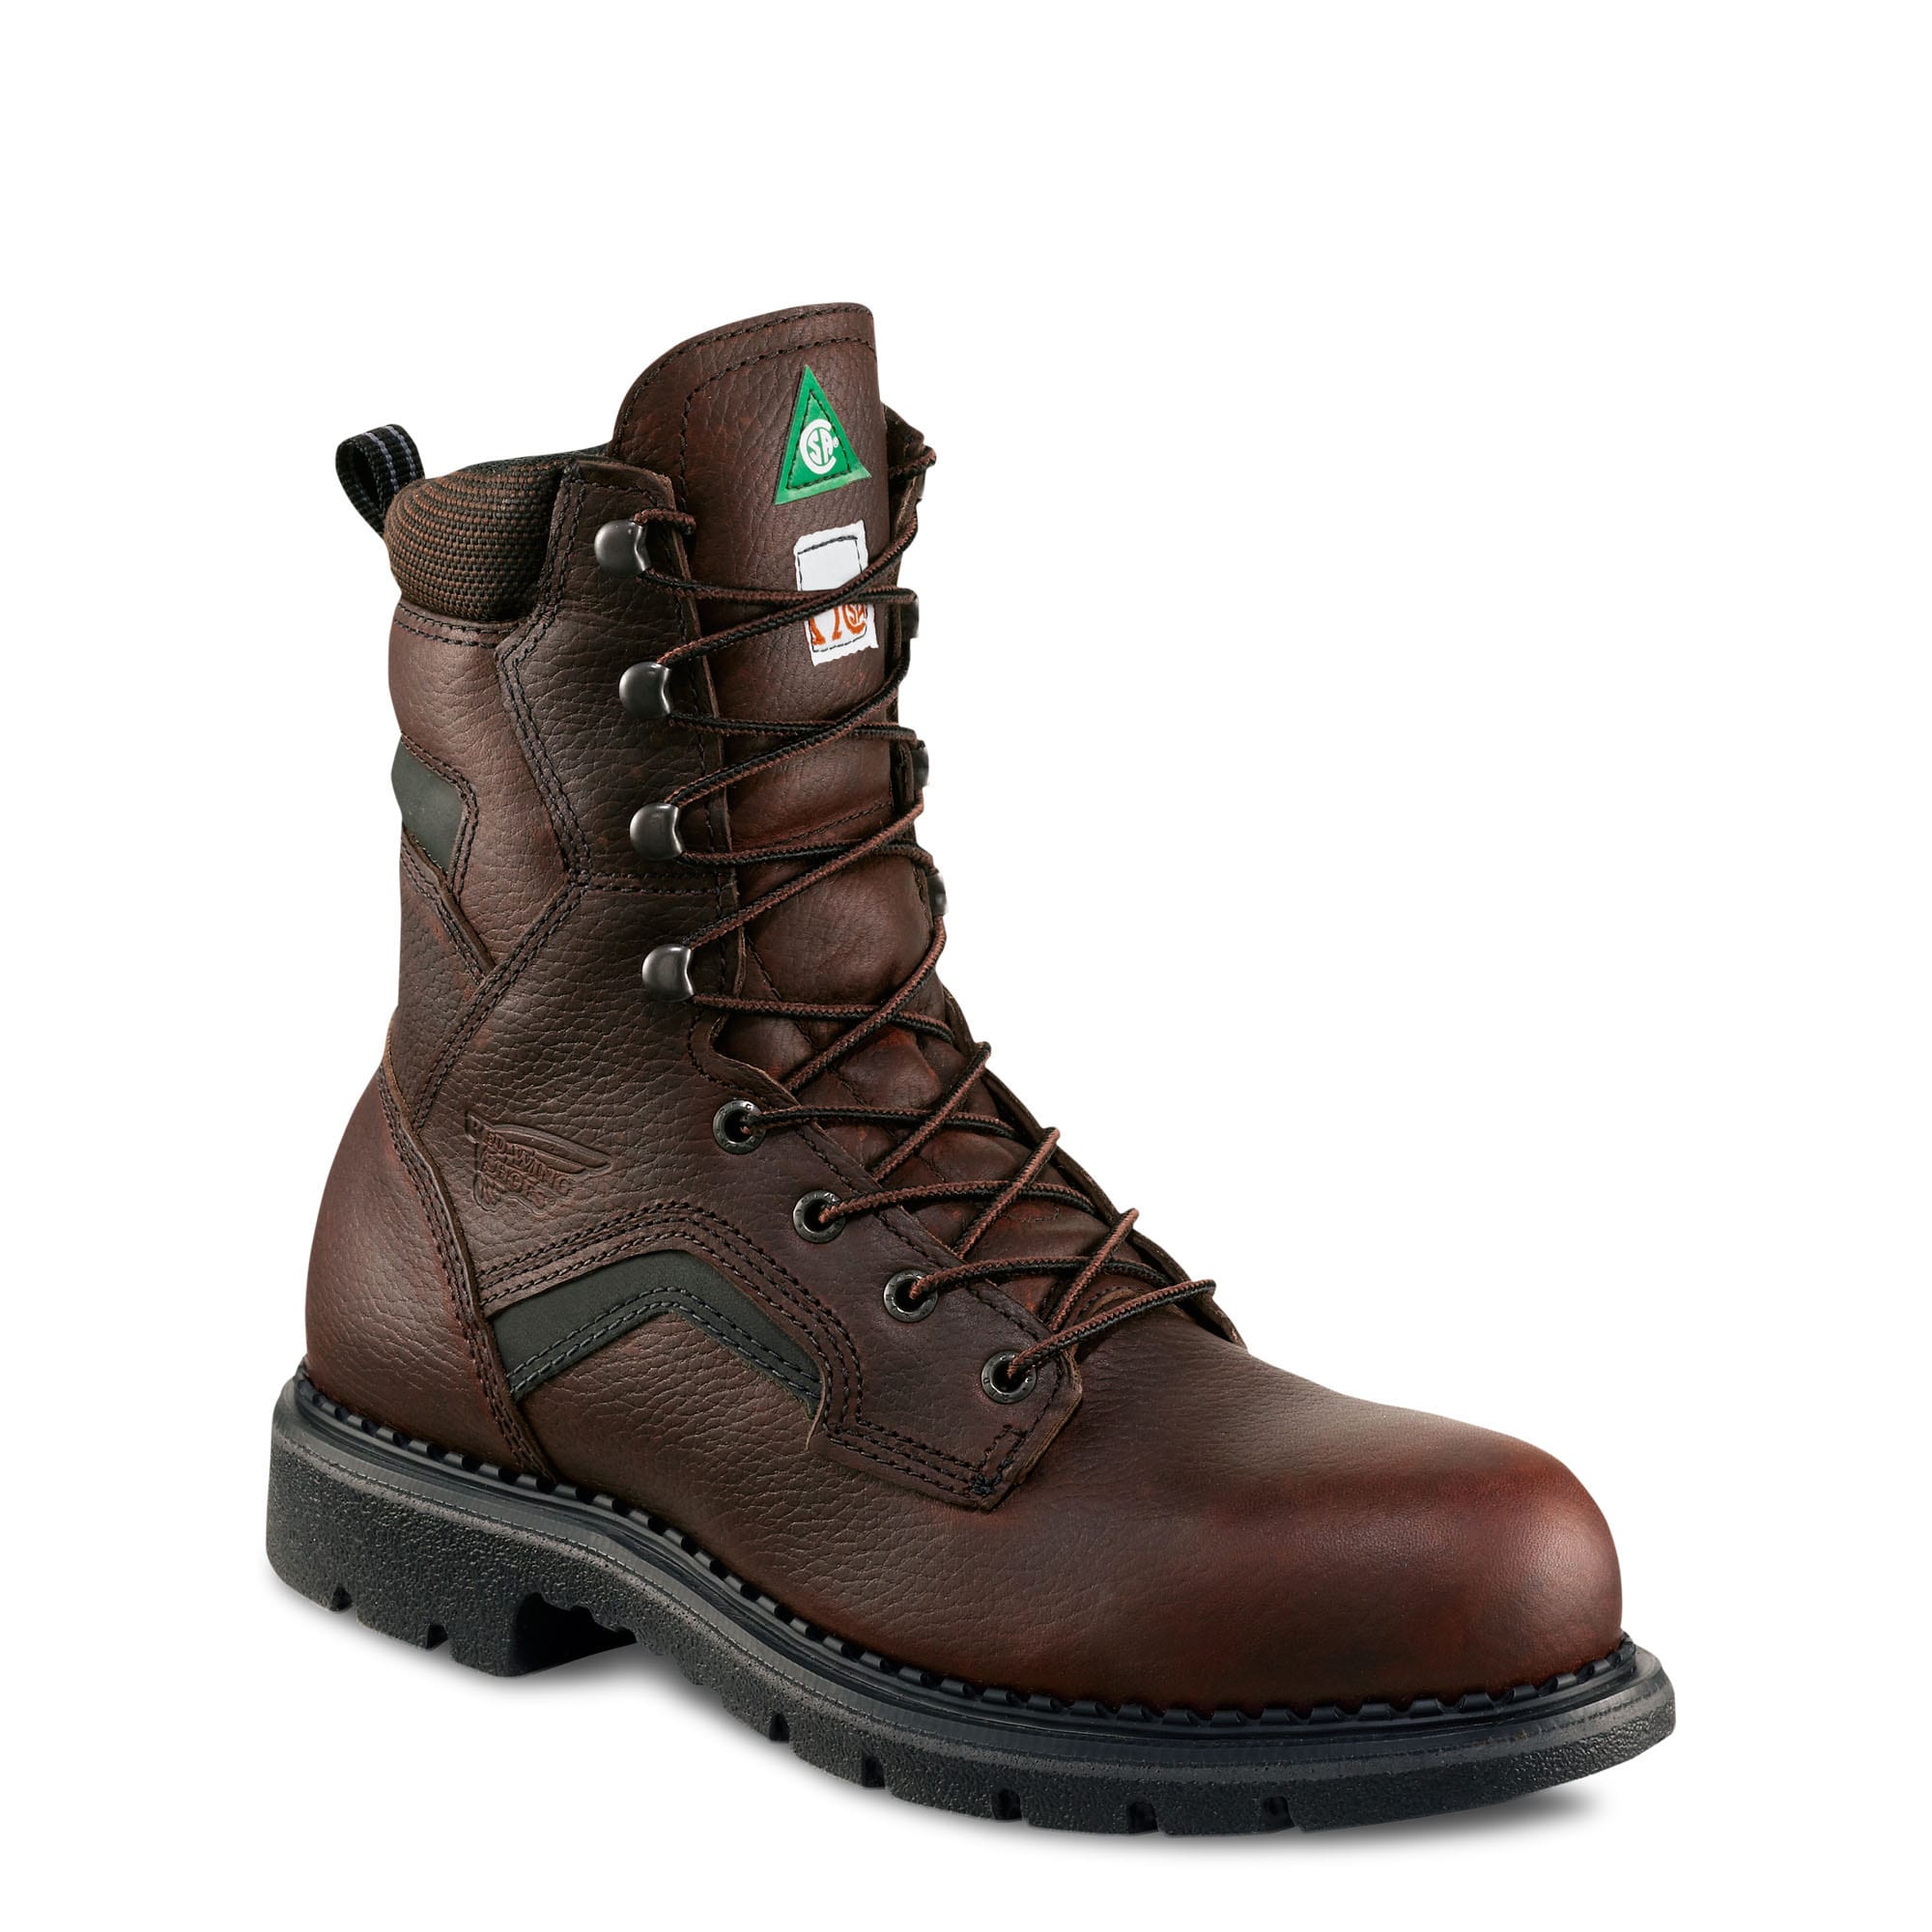 redwing safety boots canada